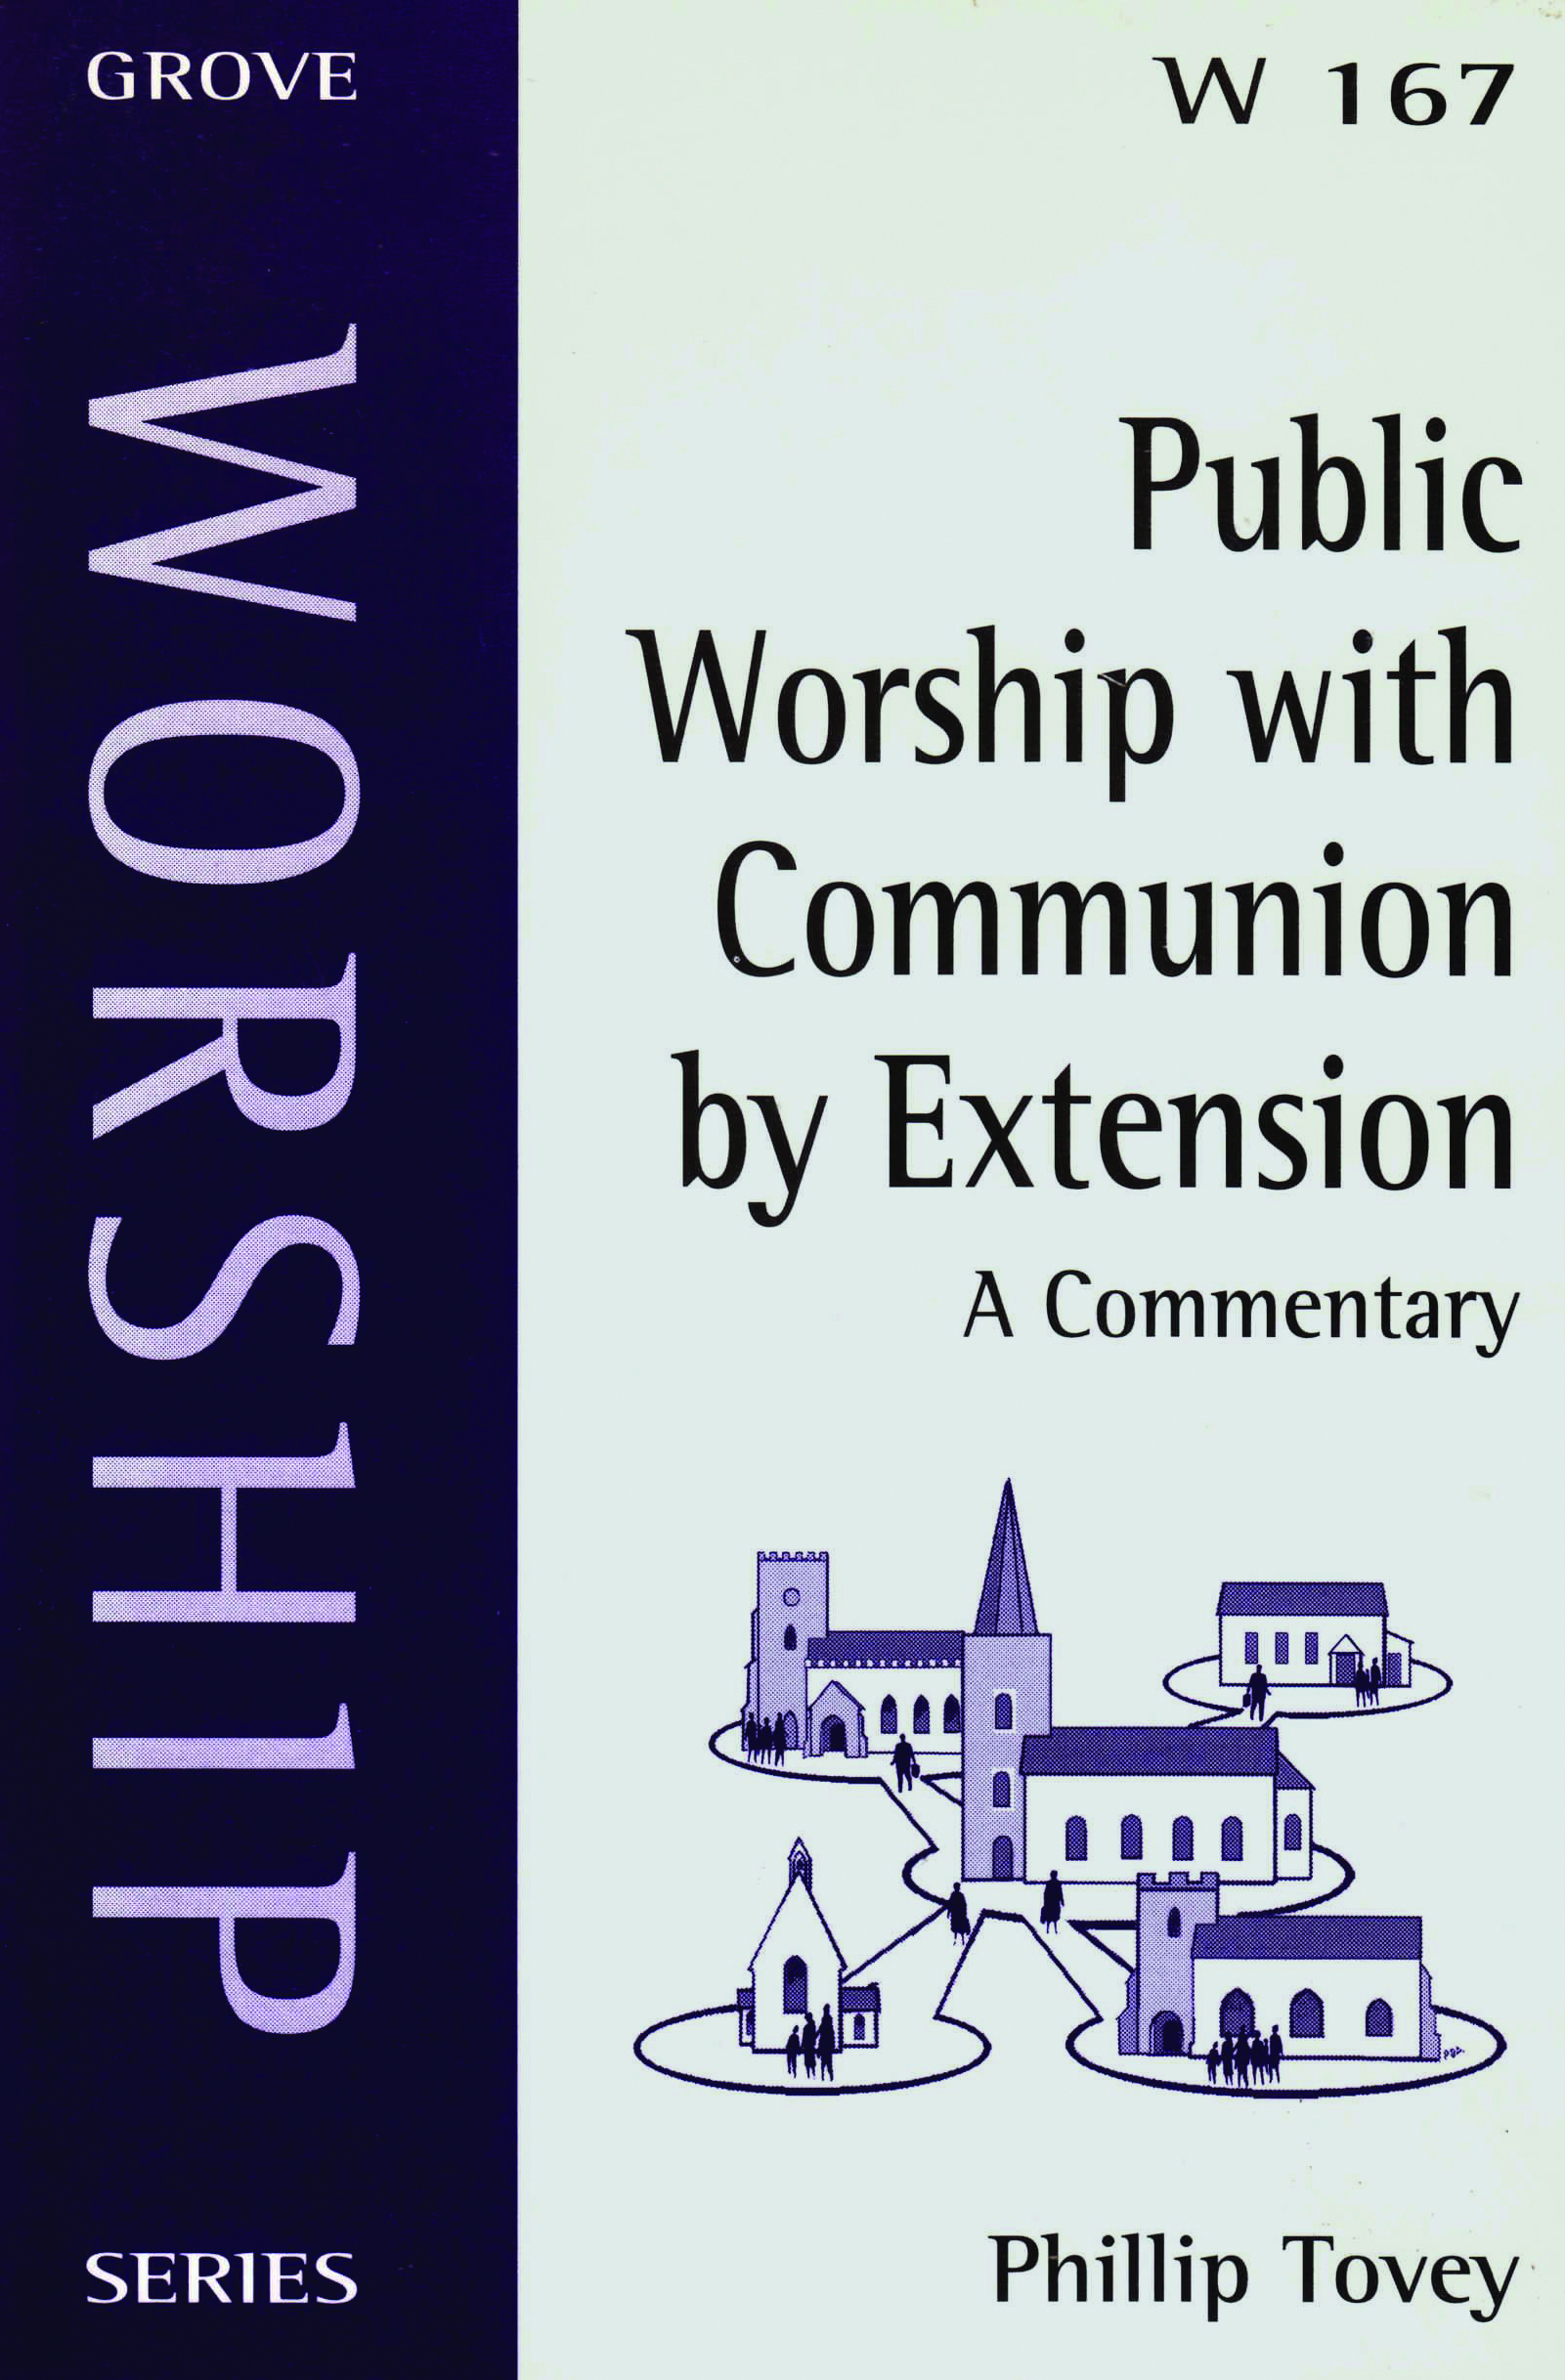 Public Worship with Communion by Extension